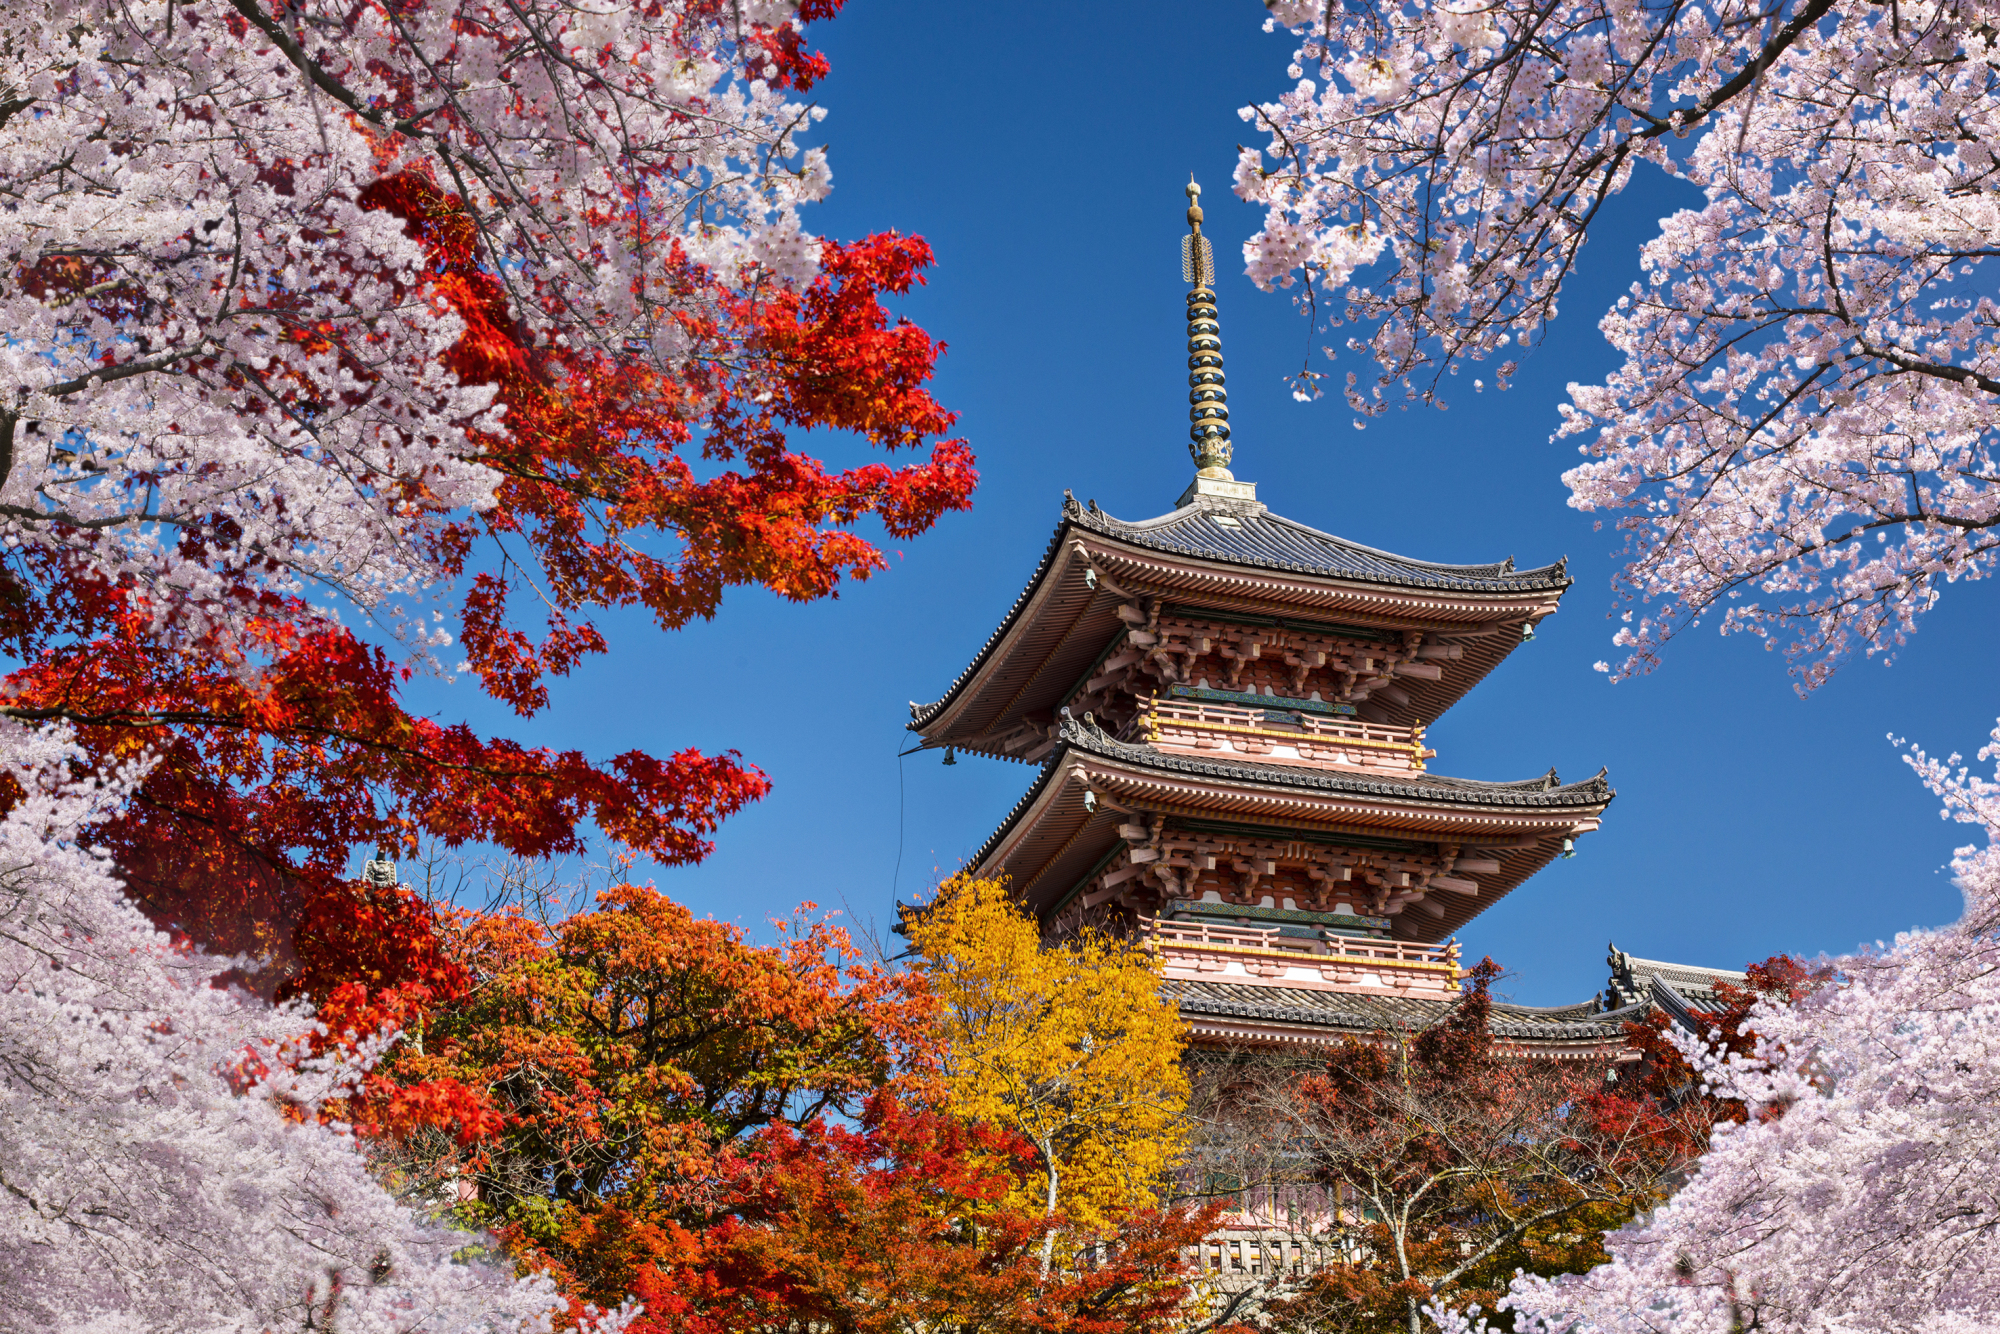 Through genetic manipulation, Kyoto University researchers have cracked the code of cherry trees and found a way to make them bloom in both spring and fall. | GETTY IMAGES